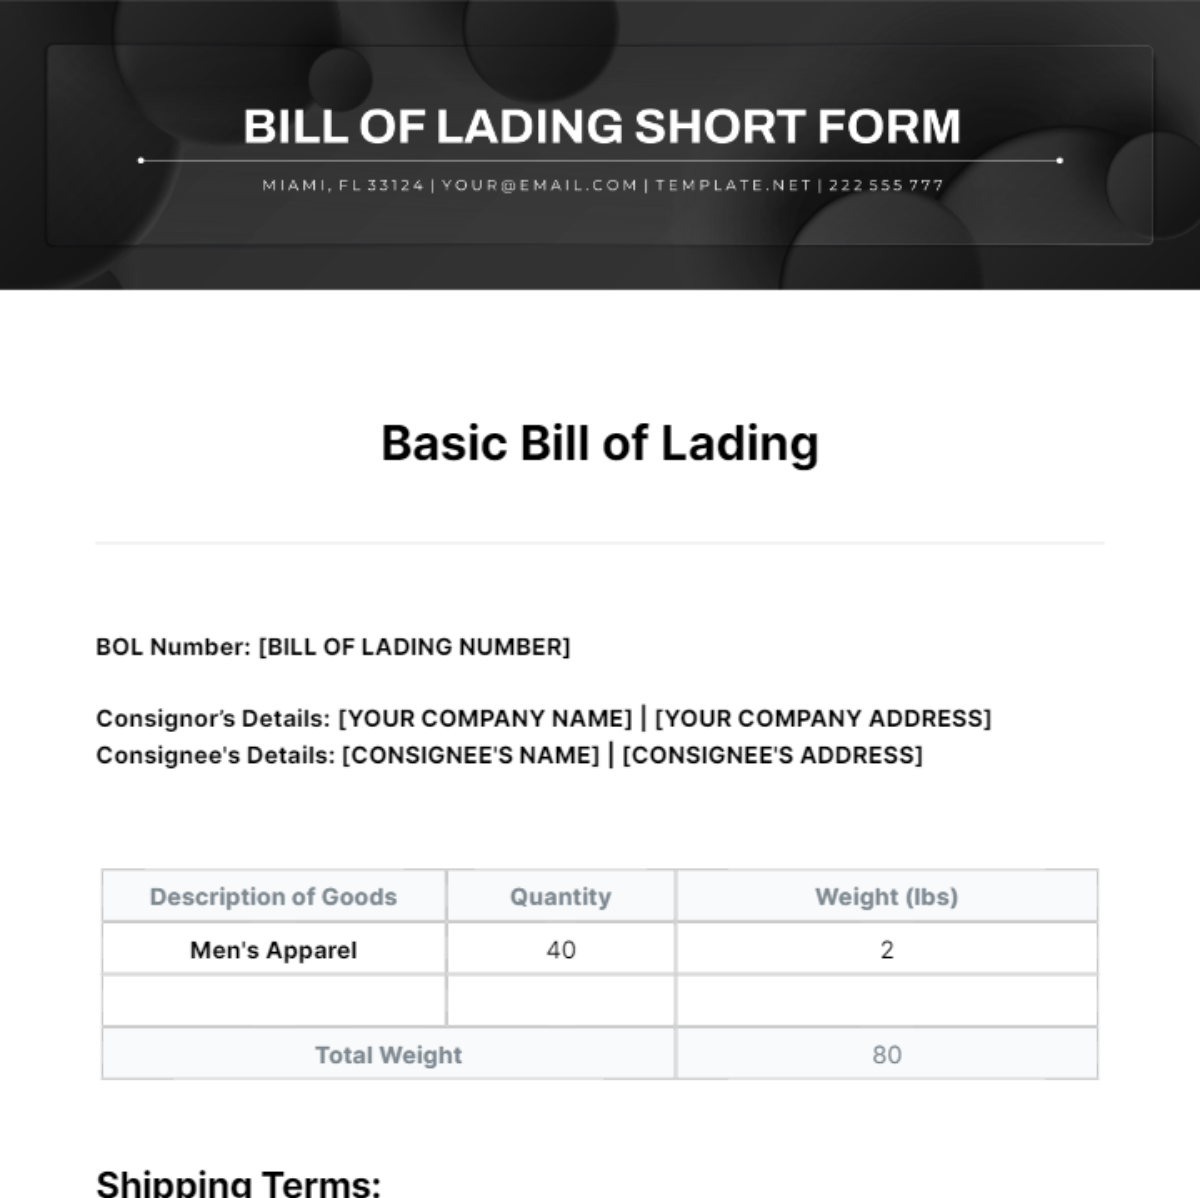 Basic Bill of Lading Template